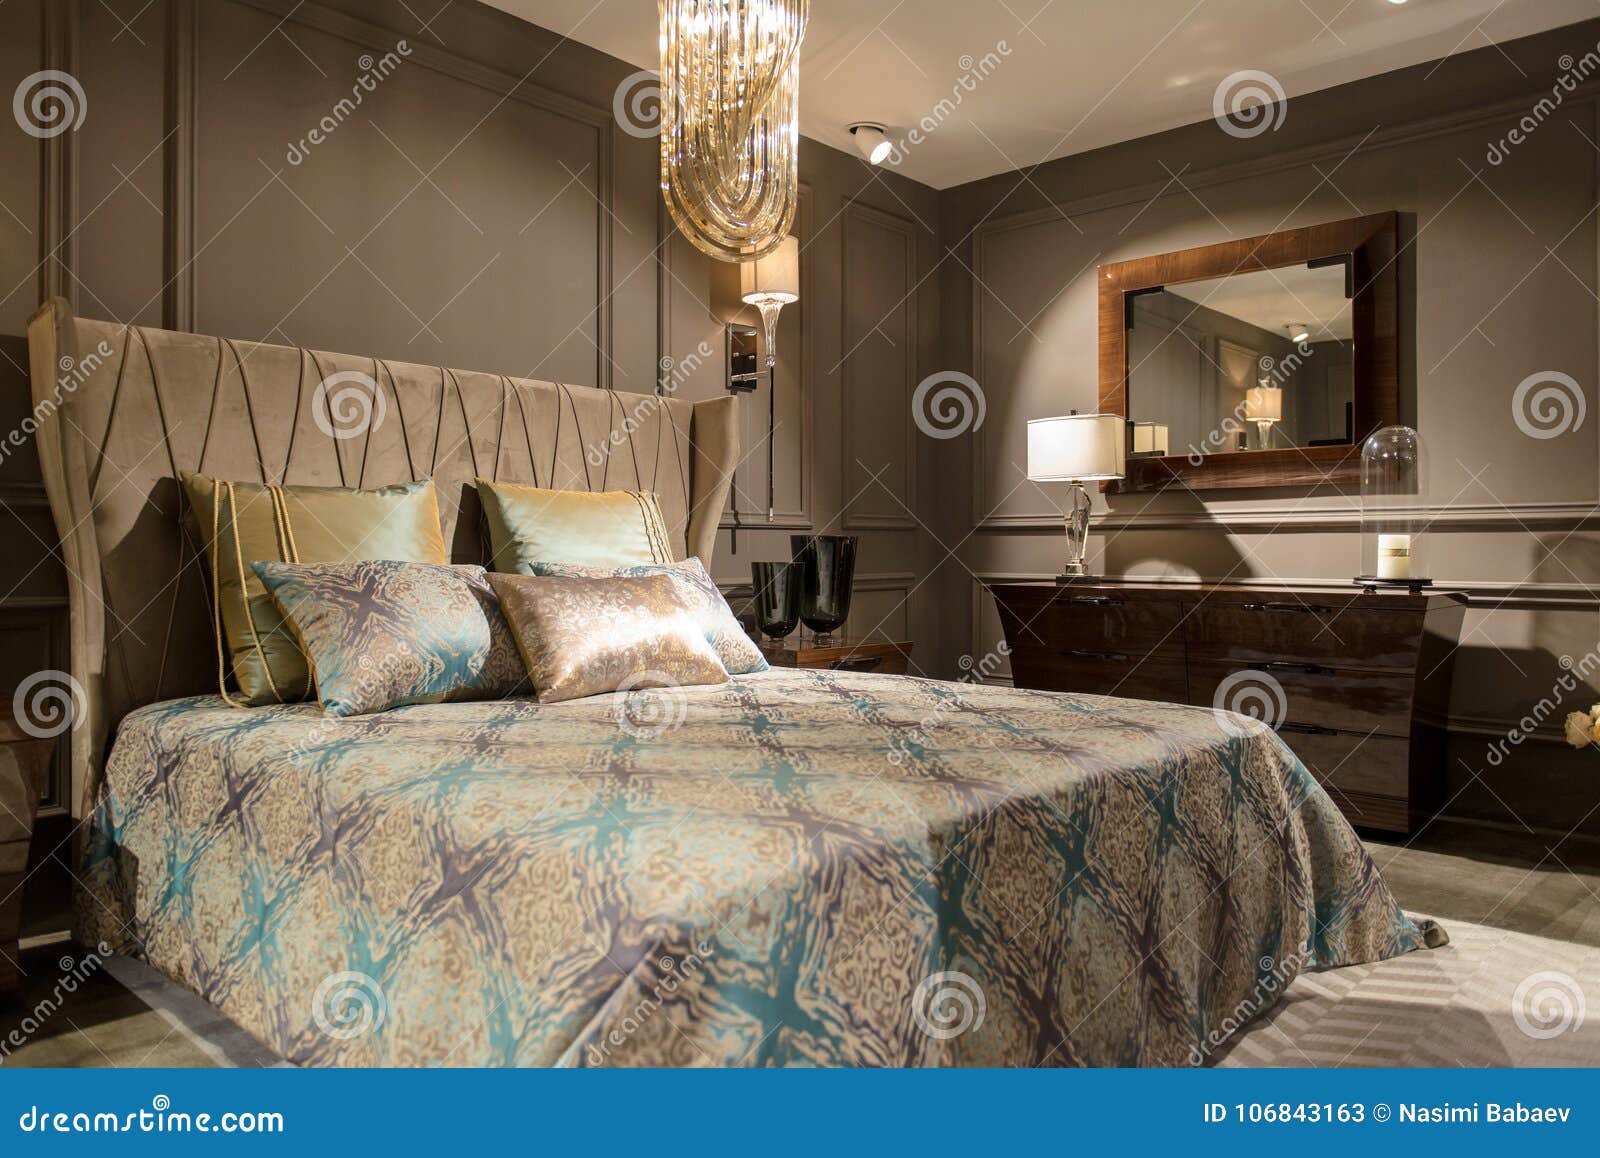 Luxury Bedroom Interior With Carved Wood Bed Dresser And Nights